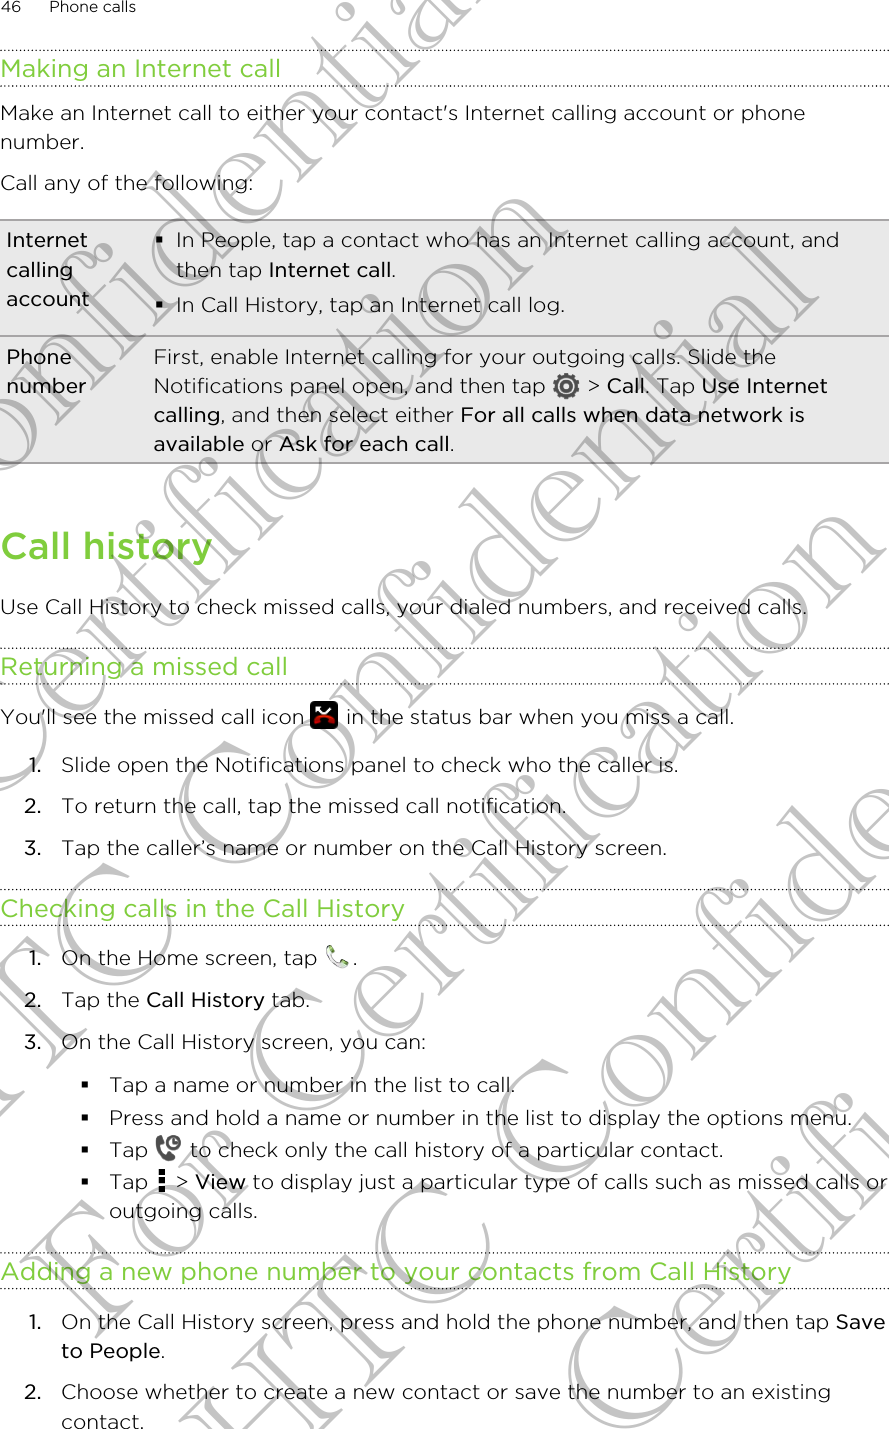 Making an Internet callMake an Internet call to either your contact&apos;s Internet calling account or phonenumber.Call any of the following:Internetcallingaccount§In People, tap a contact who has an Internet calling account, andthen tap Internet call.§In Call History, tap an Internet call log.PhonenumberFirst, enable Internet calling for your outgoing calls. Slide theNotifications panel open, and then tap   &gt; Call. Tap Use Internetcalling, and then select either For all calls when data network isavailable or Ask for each call.Call historyUse Call History to check missed calls, your dialed numbers, and received calls.Returning a missed callYou&apos;ll see the missed call icon   in the status bar when you miss a call.1. Slide open the Notifications panel to check who the caller is.2. To return the call, tap the missed call notification.3. Tap the caller’s name or number on the Call History screen.Checking calls in the Call History1. On the Home screen, tap  .2. Tap the Call History tab.3. On the Call History screen, you can:§Tap a name or number in the list to call.§Press and hold a name or number in the list to display the options menu.§Tap   to check only the call history of a particular contact.§Tap   &gt; View to display just a particular type of calls such as missed calls oroutgoing calls.Adding a new phone number to your contacts from Call History1. On the Call History screen, press and hold the phone number, and then tap Saveto People.2. Choose whether to create a new contact or save the number to an existingcontact.46 Phone callsHTC Confidential For Certification HTC Confidential For Certification HTC Confidential For Certification